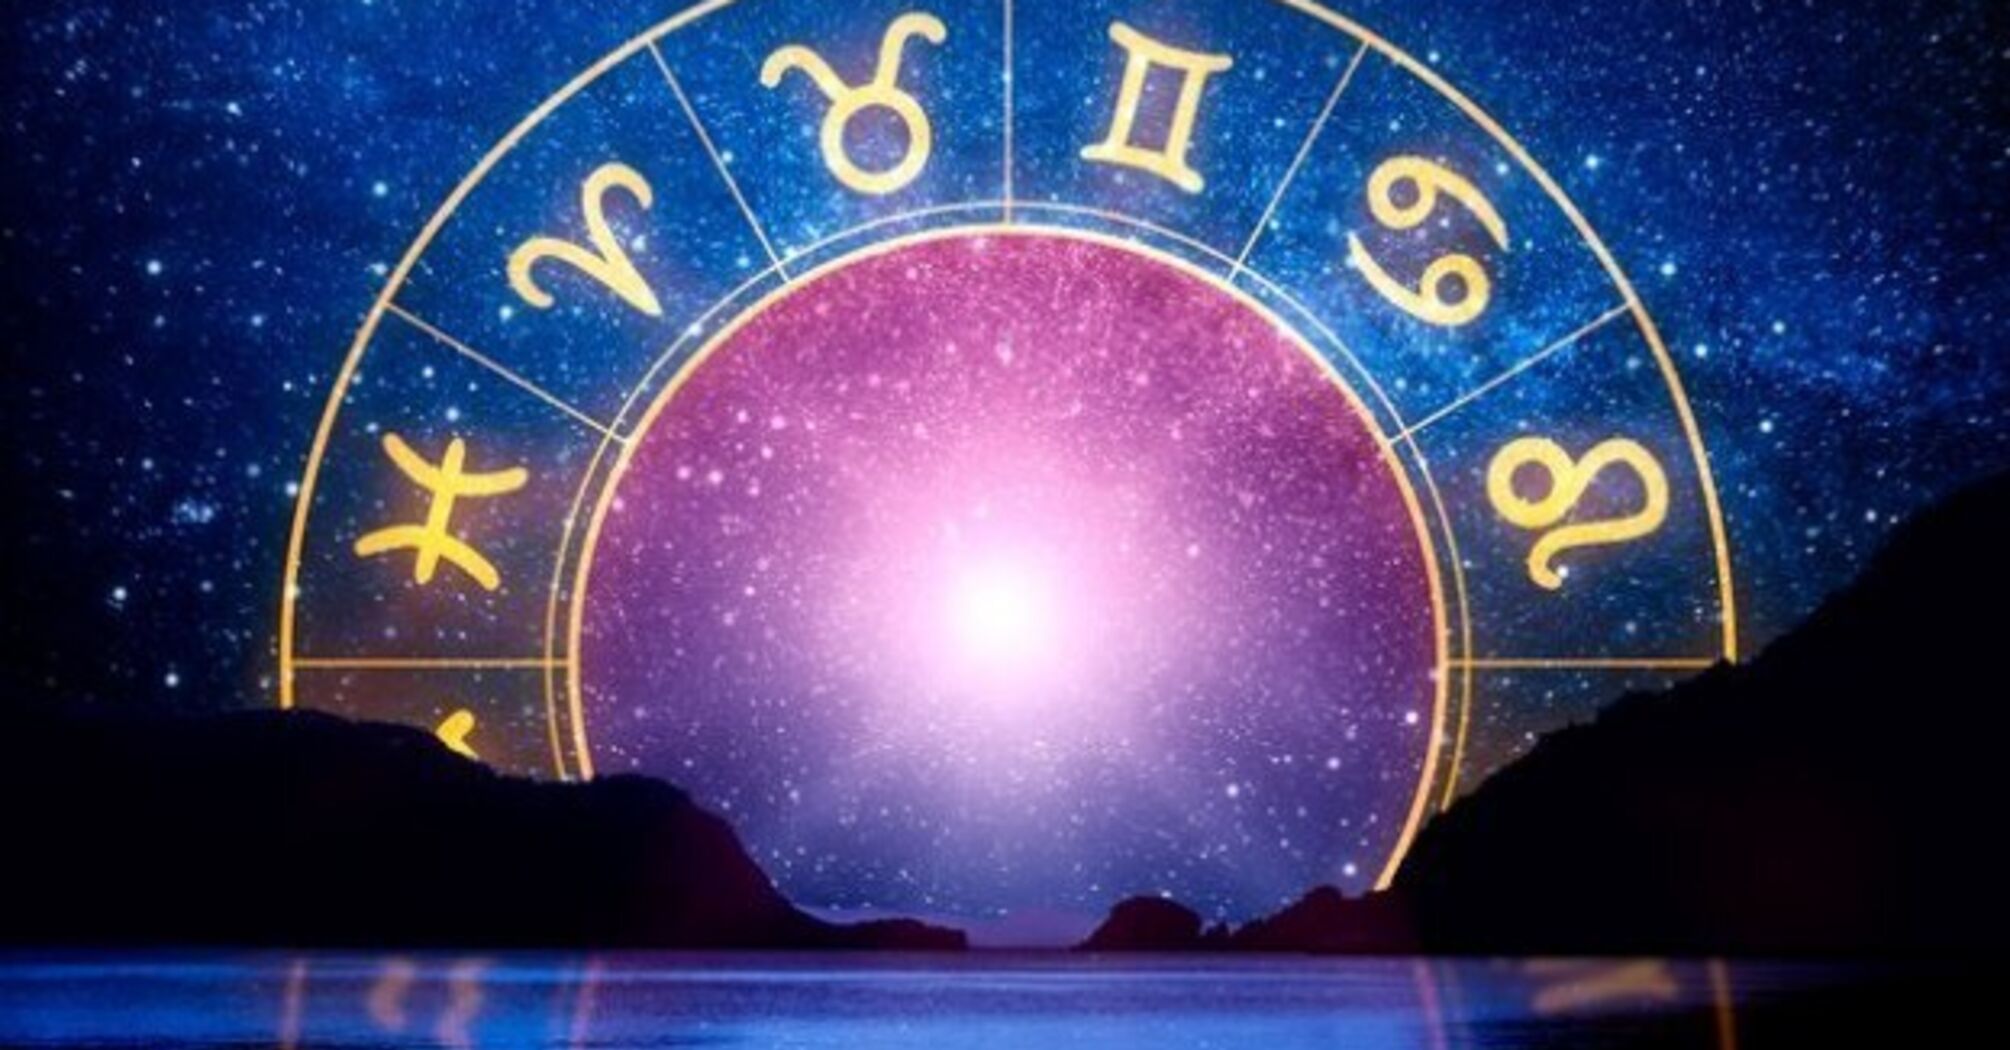 These zodiac signs may face relationship problems this week